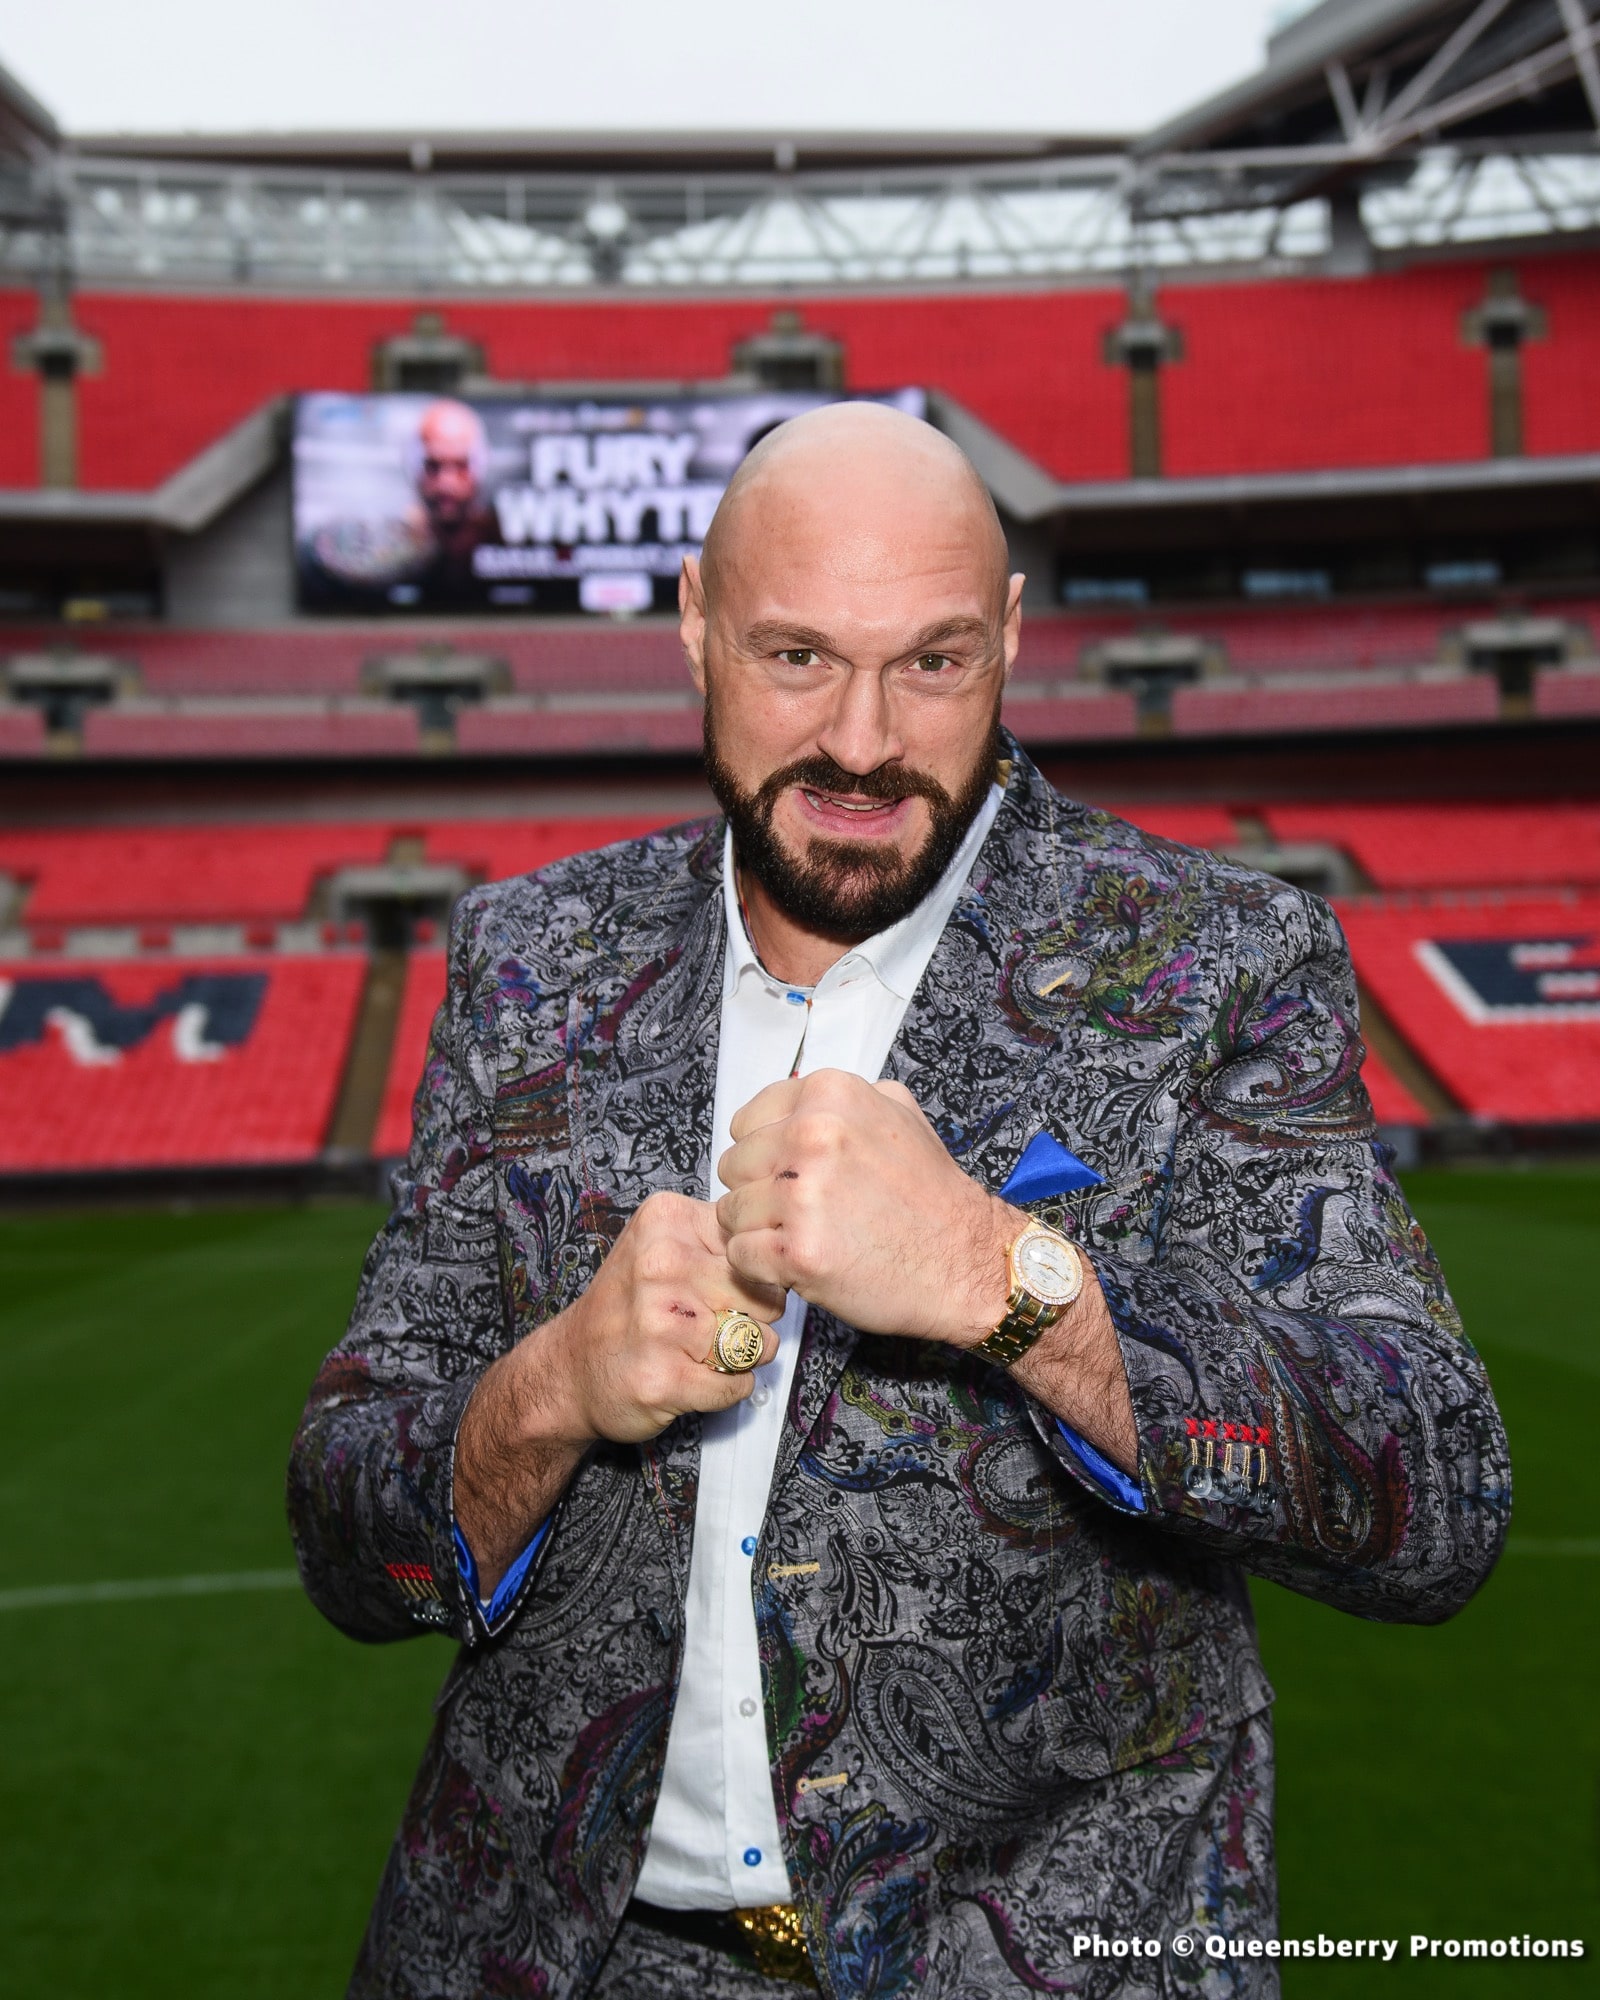 Image: Tyson Fury better than Dillian Whyte in every department says Dave Allen